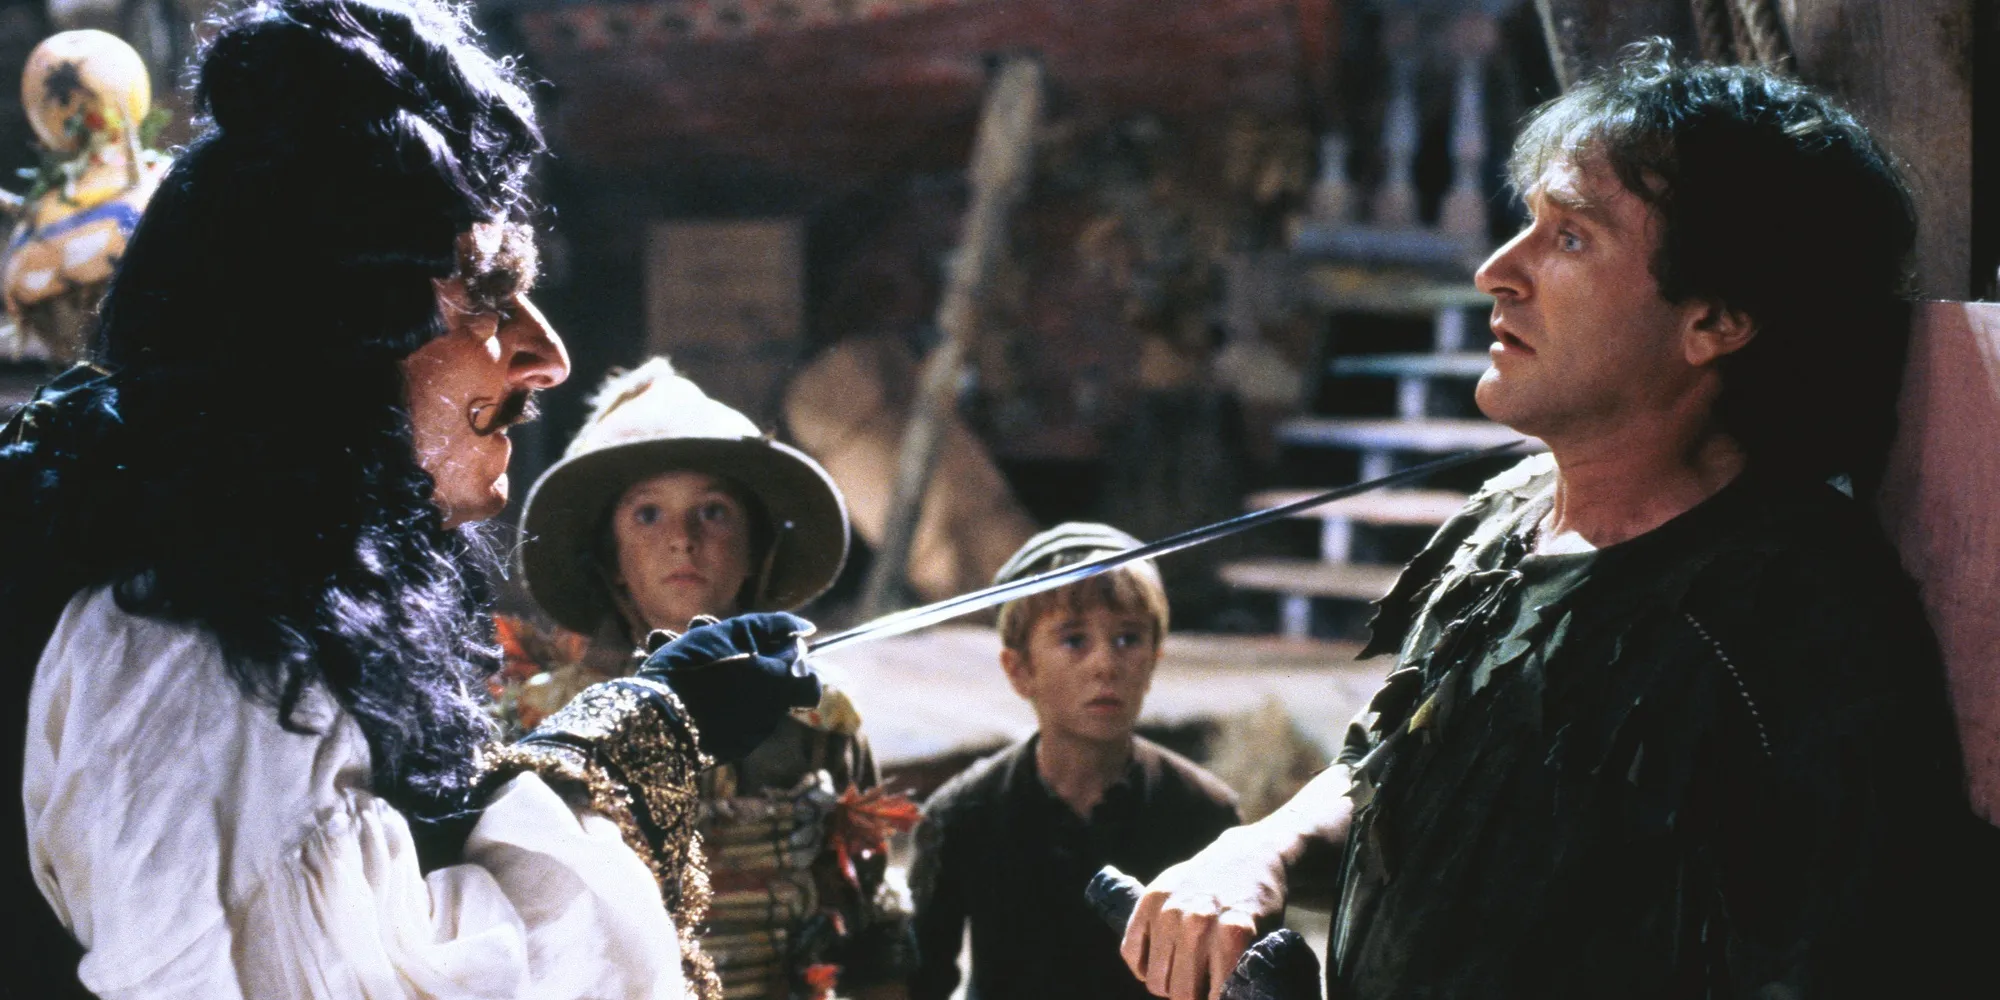 Hook and Peter Pan fight with children in the background